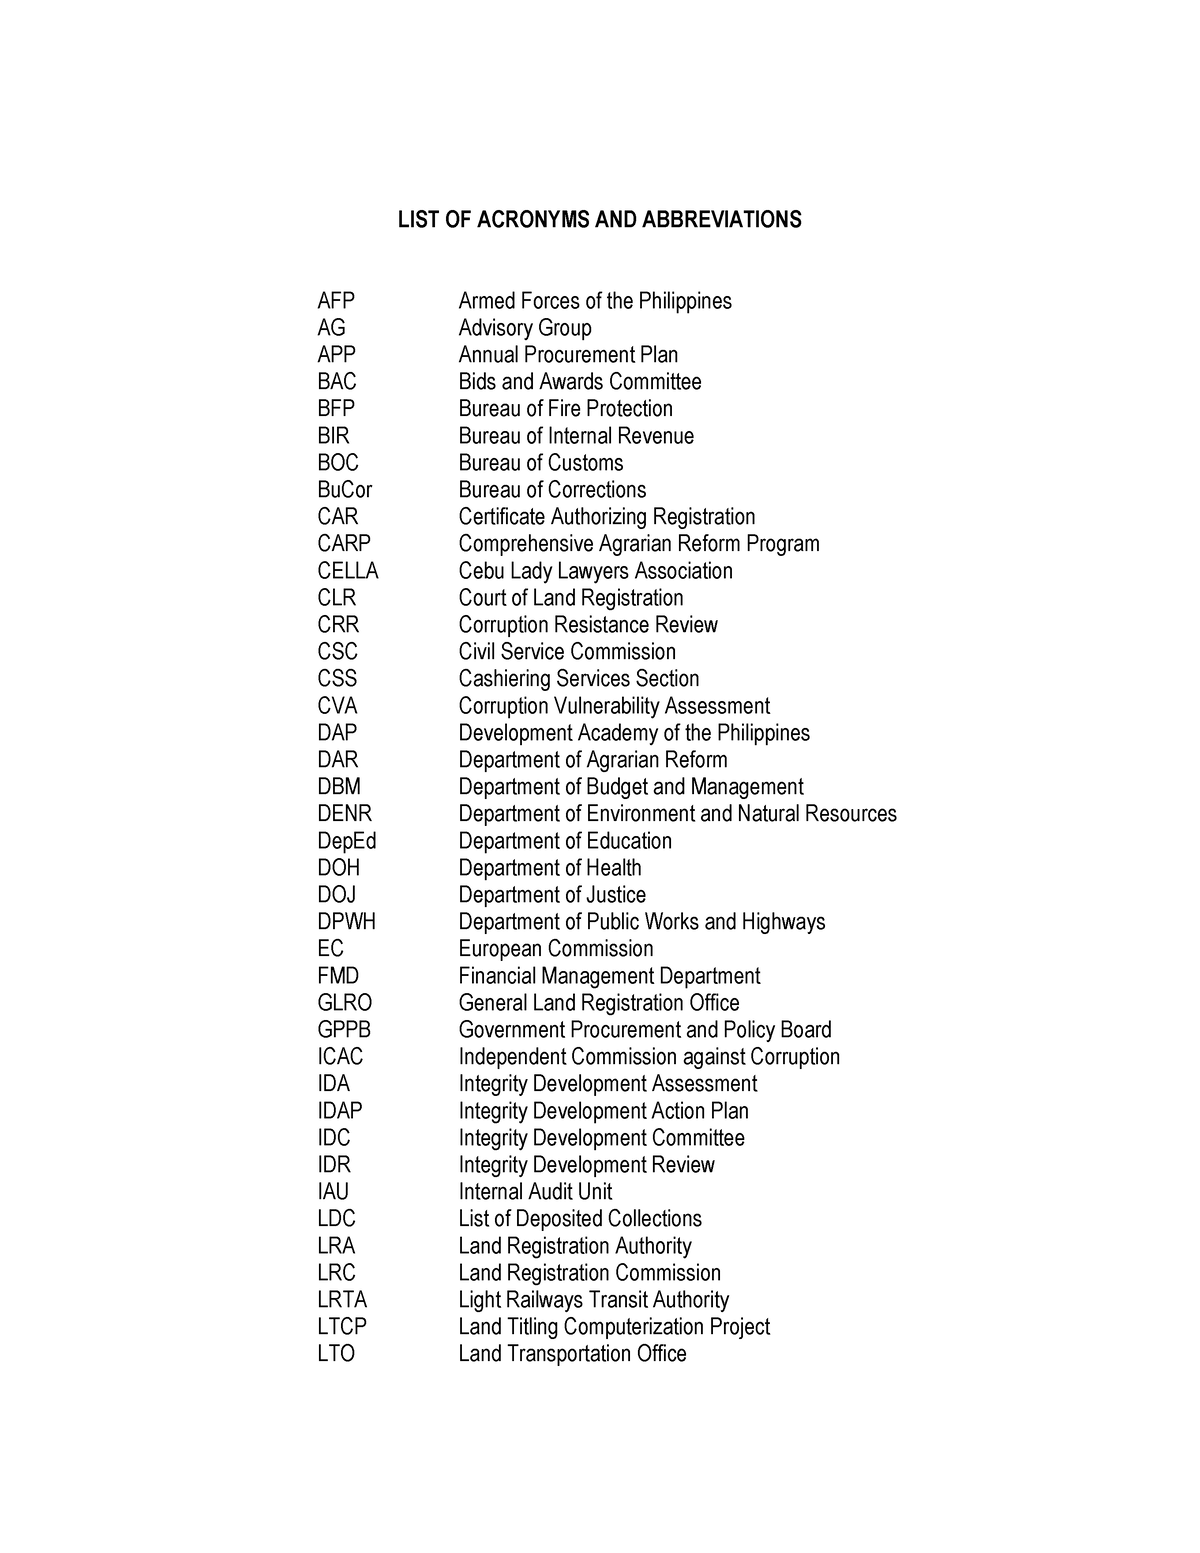 2007 lra acronym - to help my students - LIST OF ACRONYMS AND ...